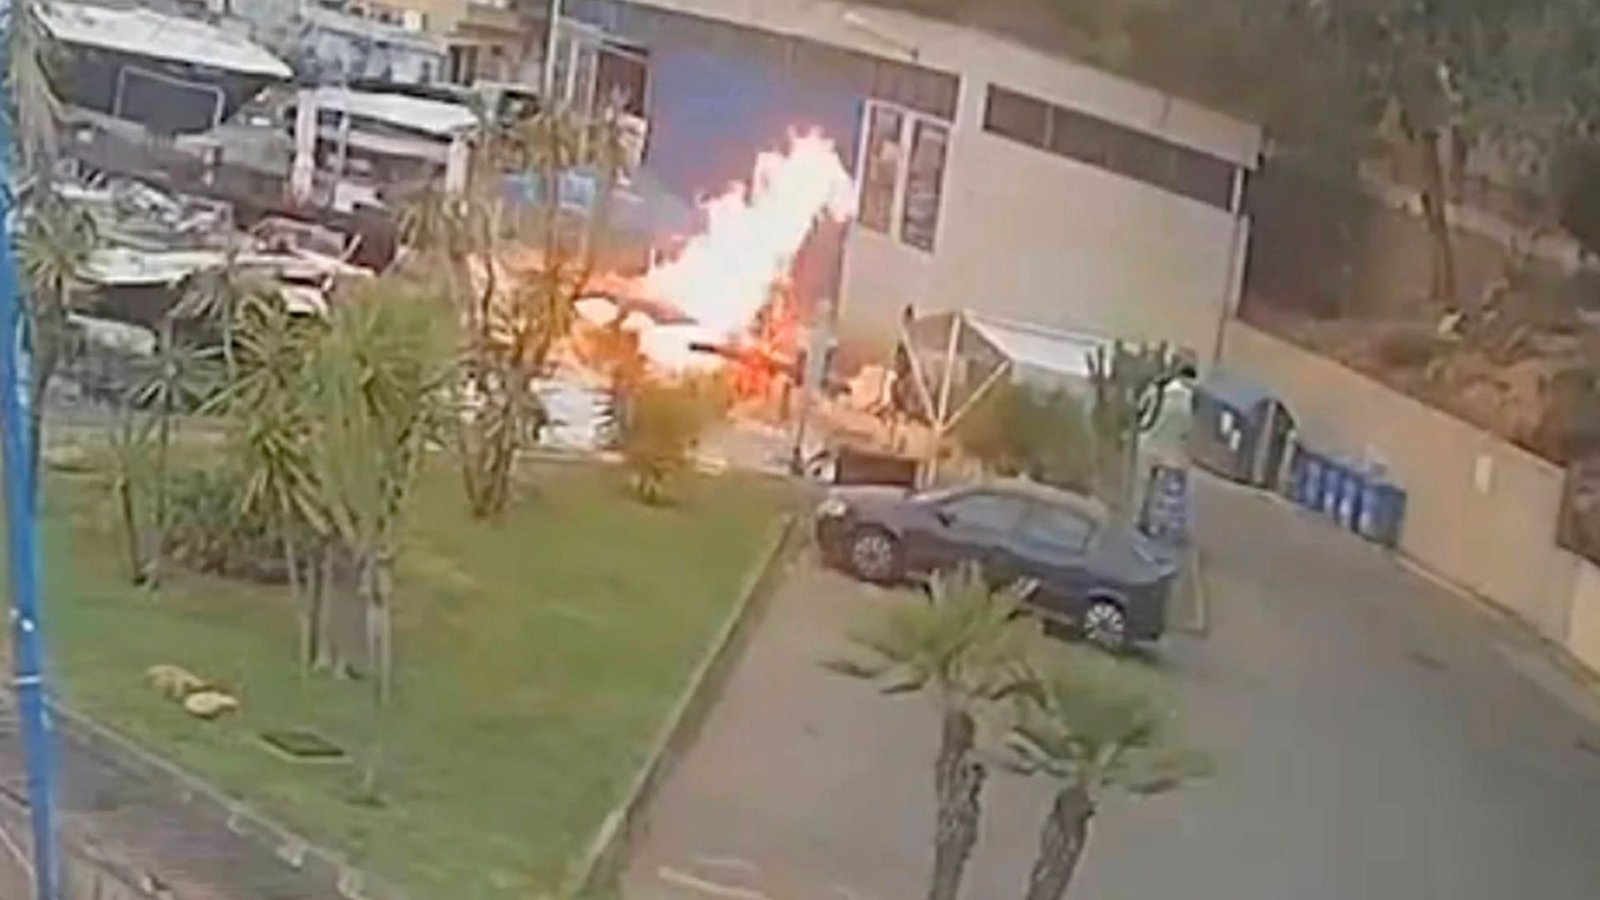 Moment boat EXPLODES in Costa Blanca port injuring Brit tourist 37 and two others in fireball blast